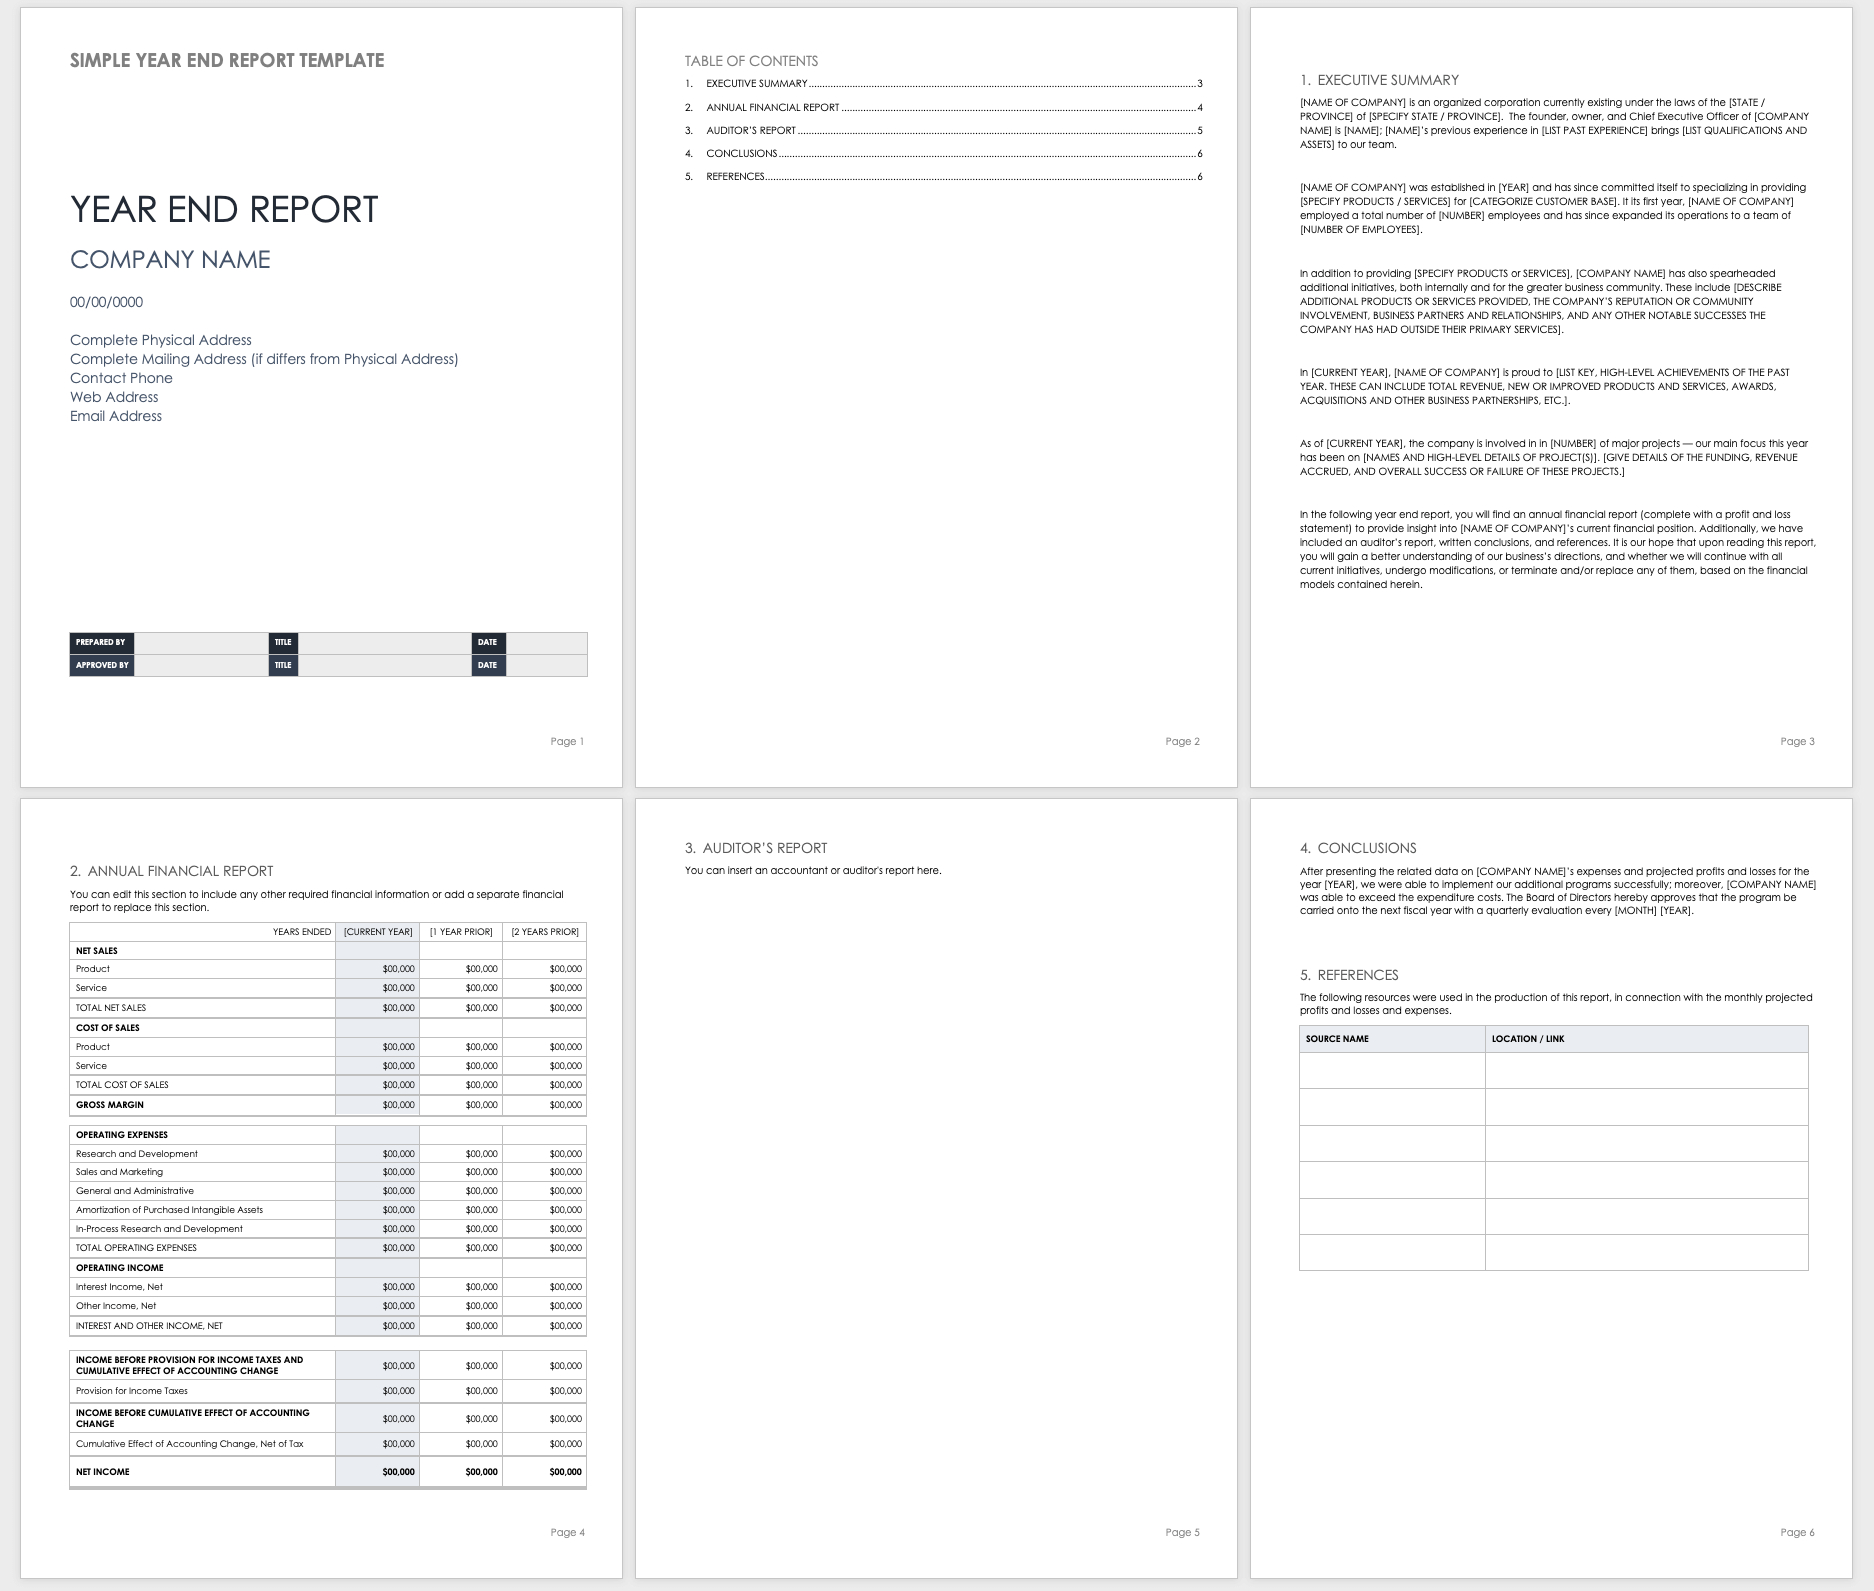 Free Year End Report Templates | Smartsheet Within Simple Report Template Word